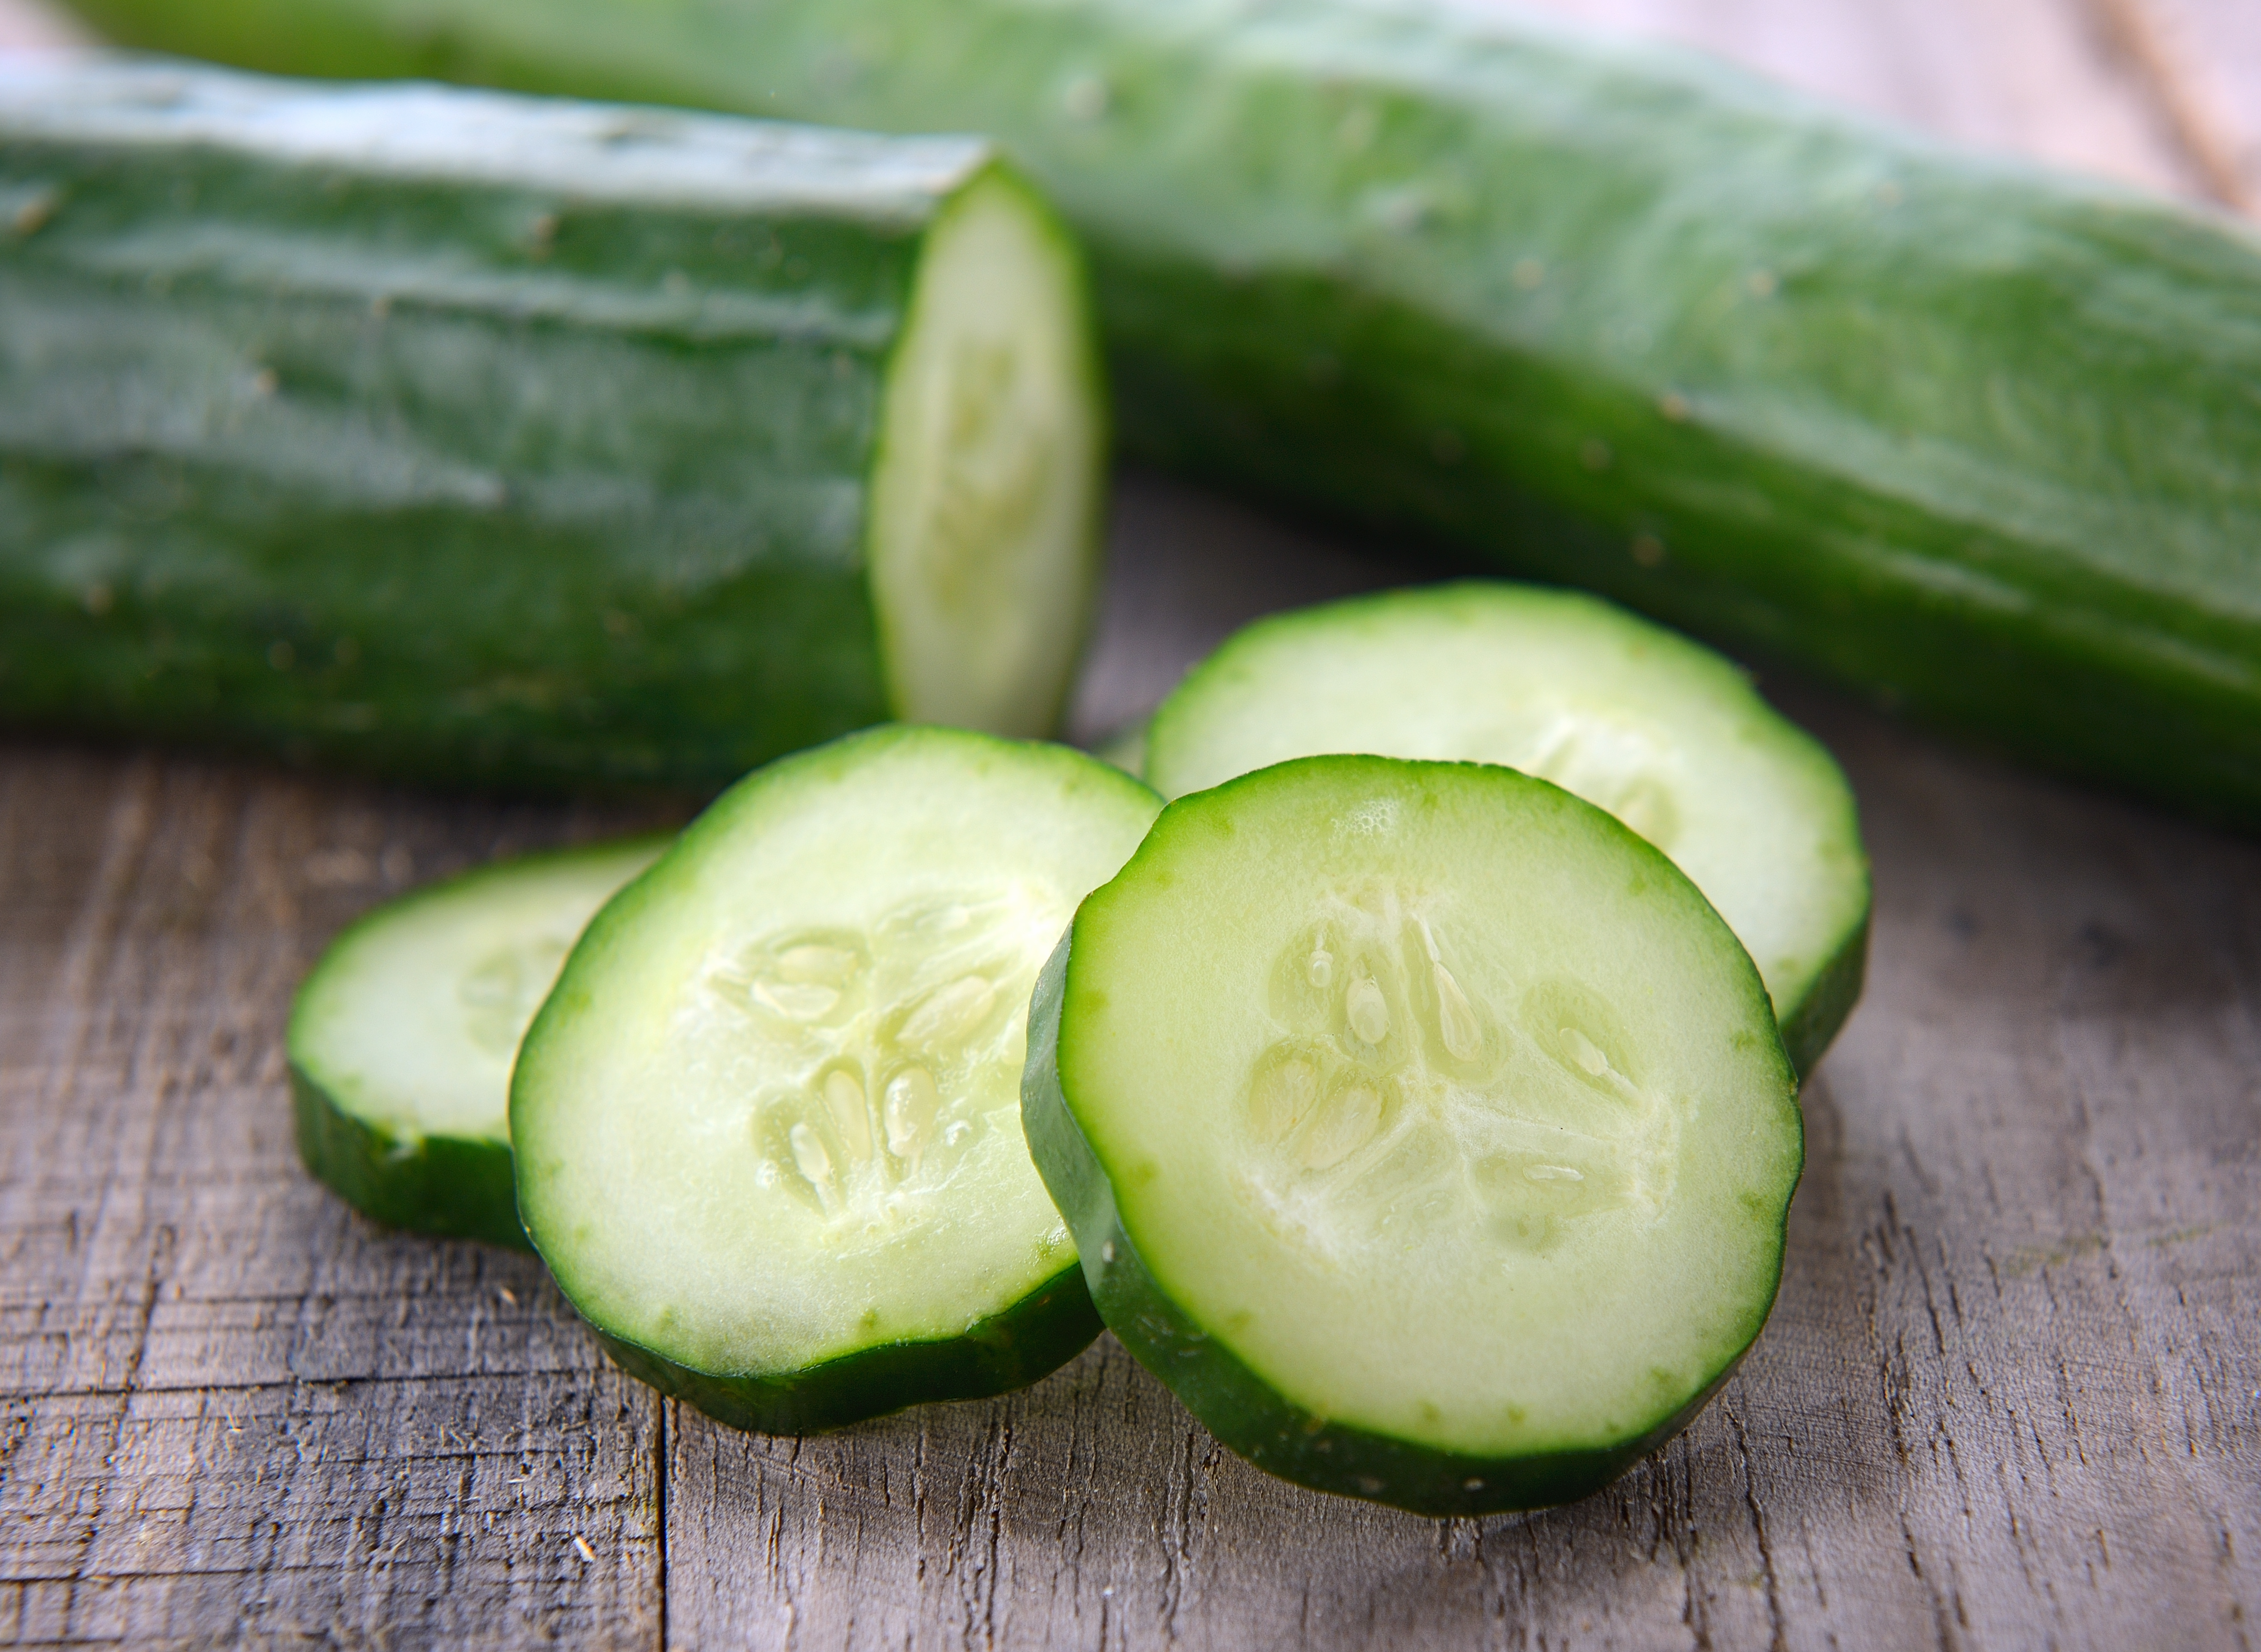 cooling foods - ayurvedic principles - cucumbers - summer produce - cooling herbs - herbs - mint